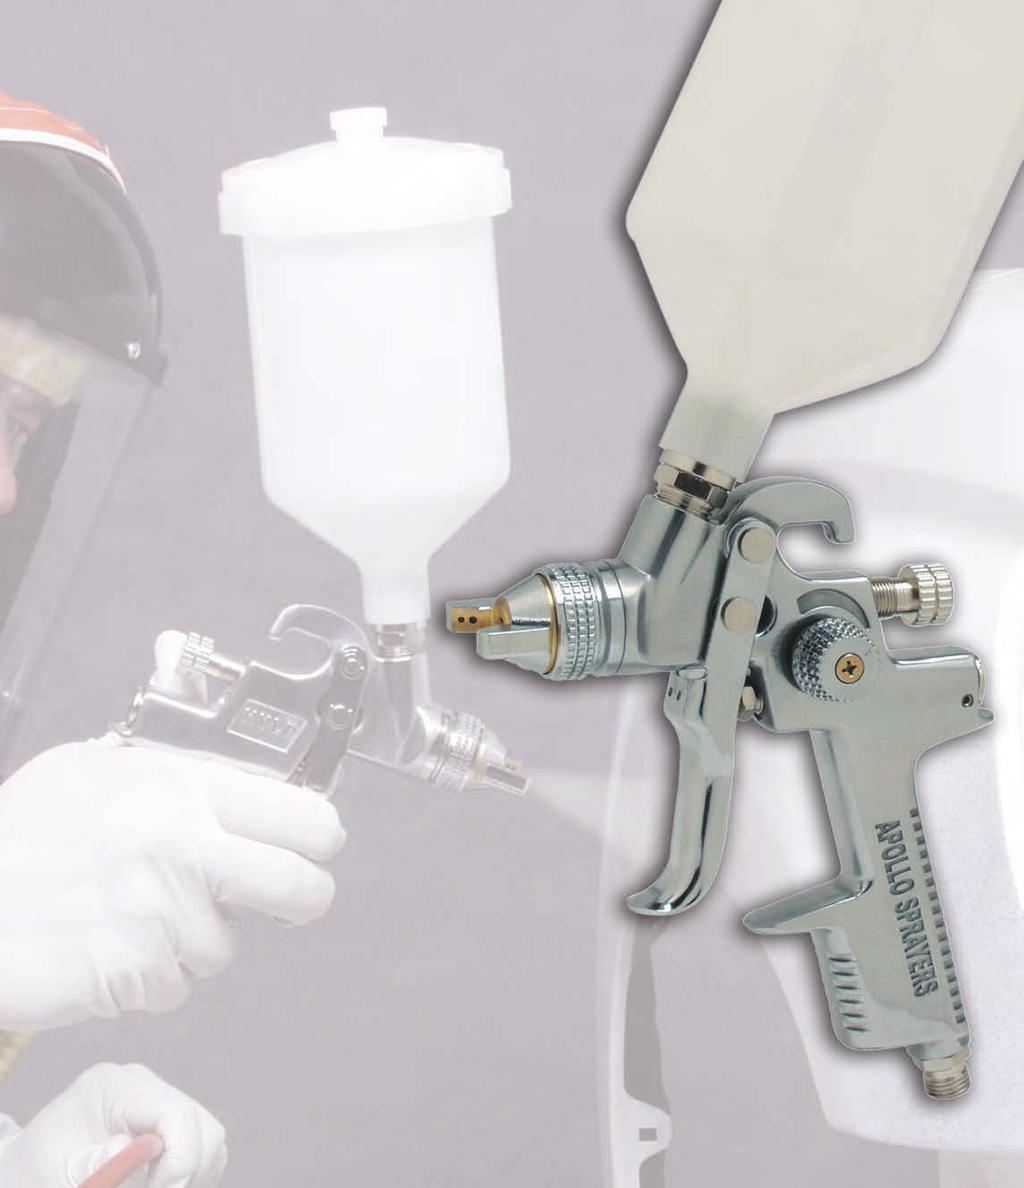 Celebrating True HVLP for over 40 years Super-Spray Conversion Spray Guns Series 8000 The Apollo 8000 Super-Spray Guns Meet the Intensive Demands of the Professional Automotive Finisher New ergonomic